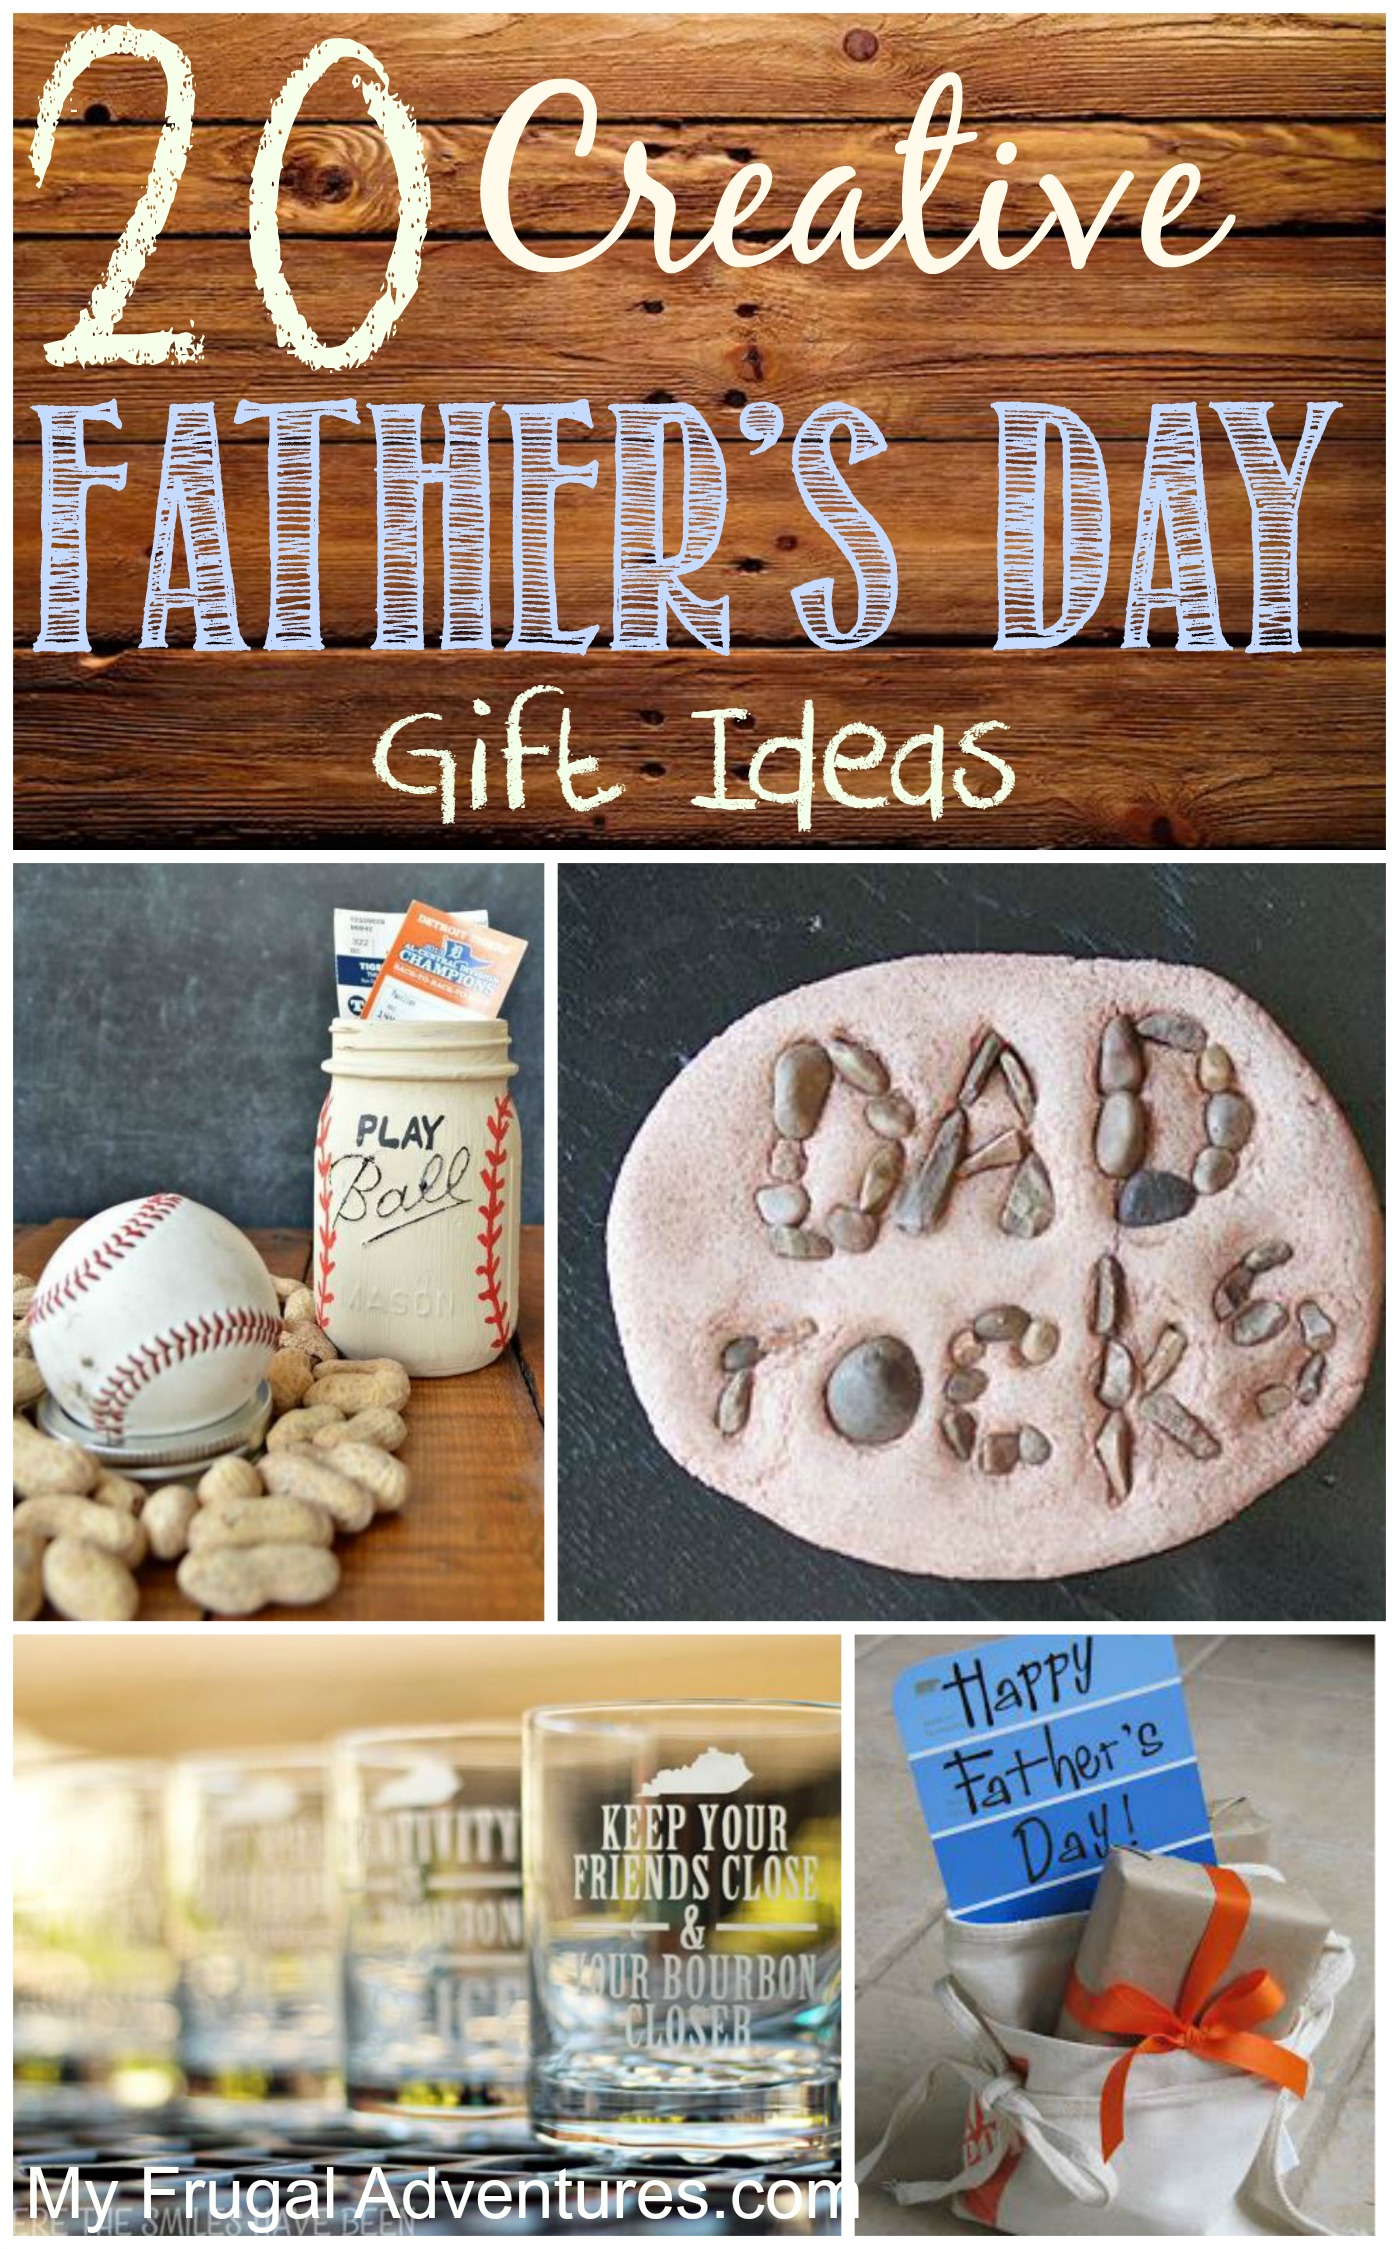 20 Creative Father's Day Gift Ideas My Frugal Adventures